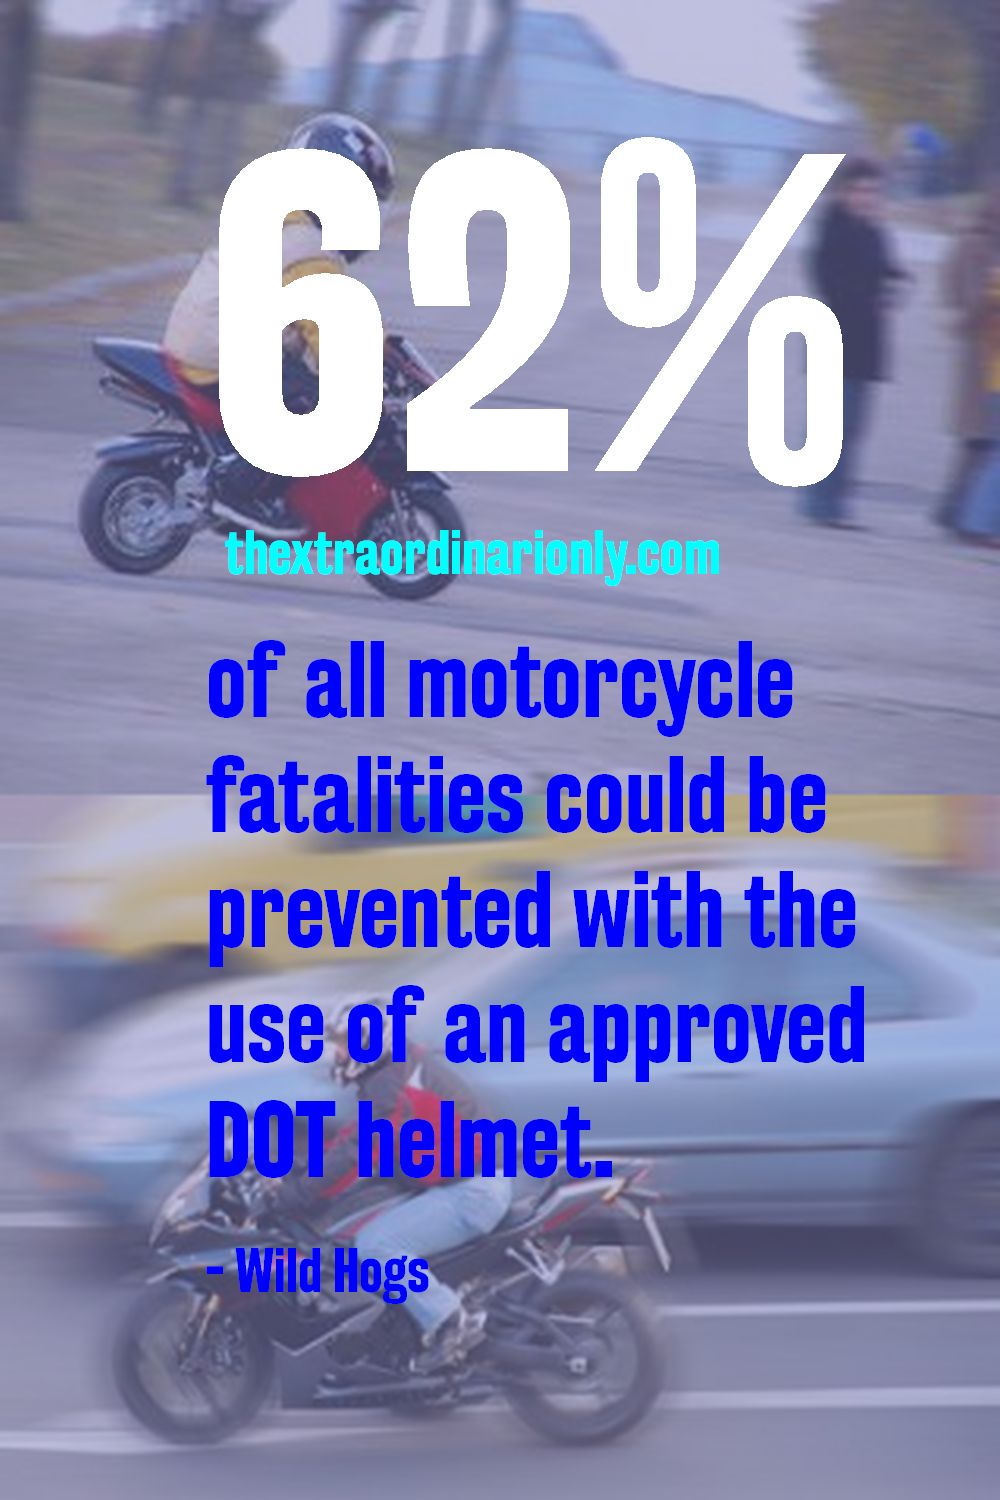 62 per cent of all motorcycle fatalities could be prevented with the use of an approved DOT helmet. - Wild Hogs